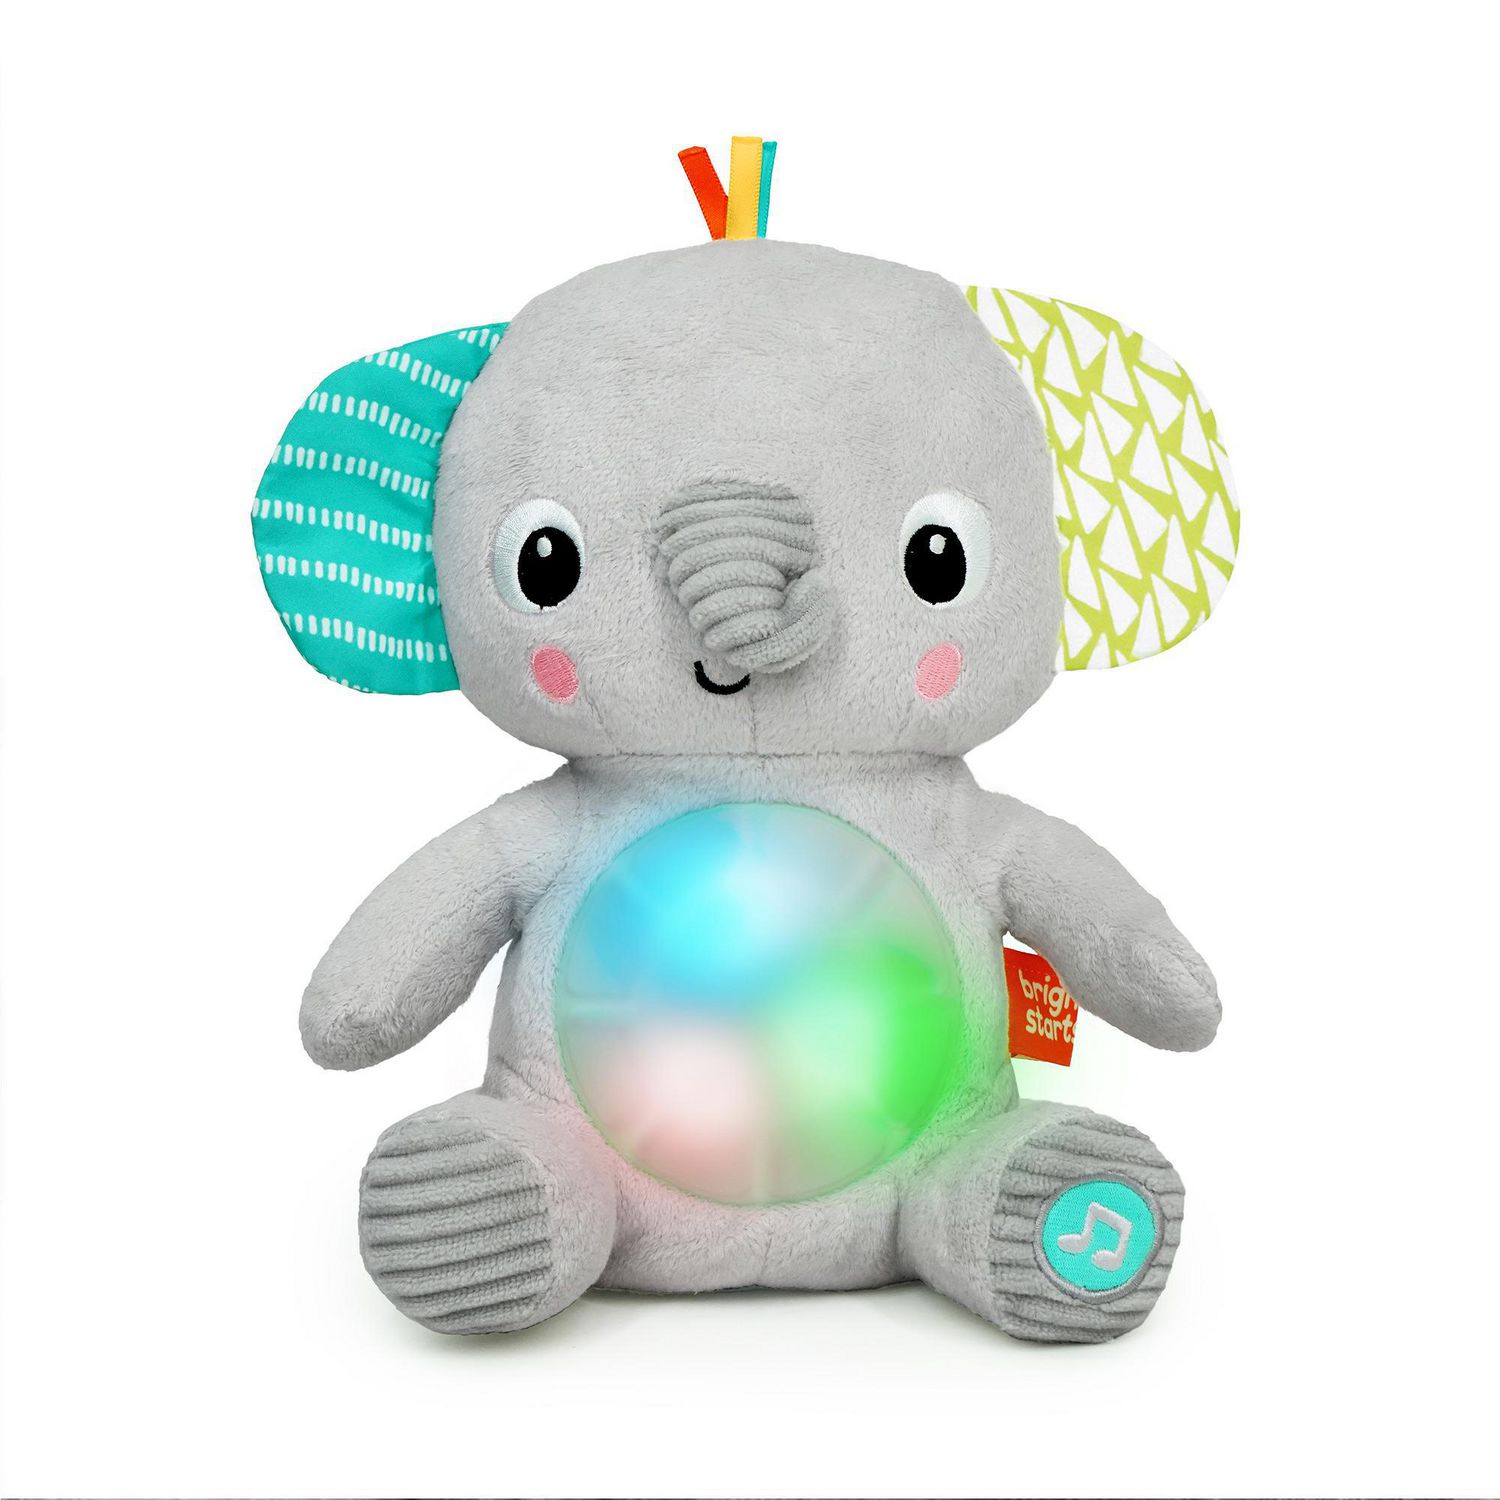 Top 20 Best Selling Plush toys on